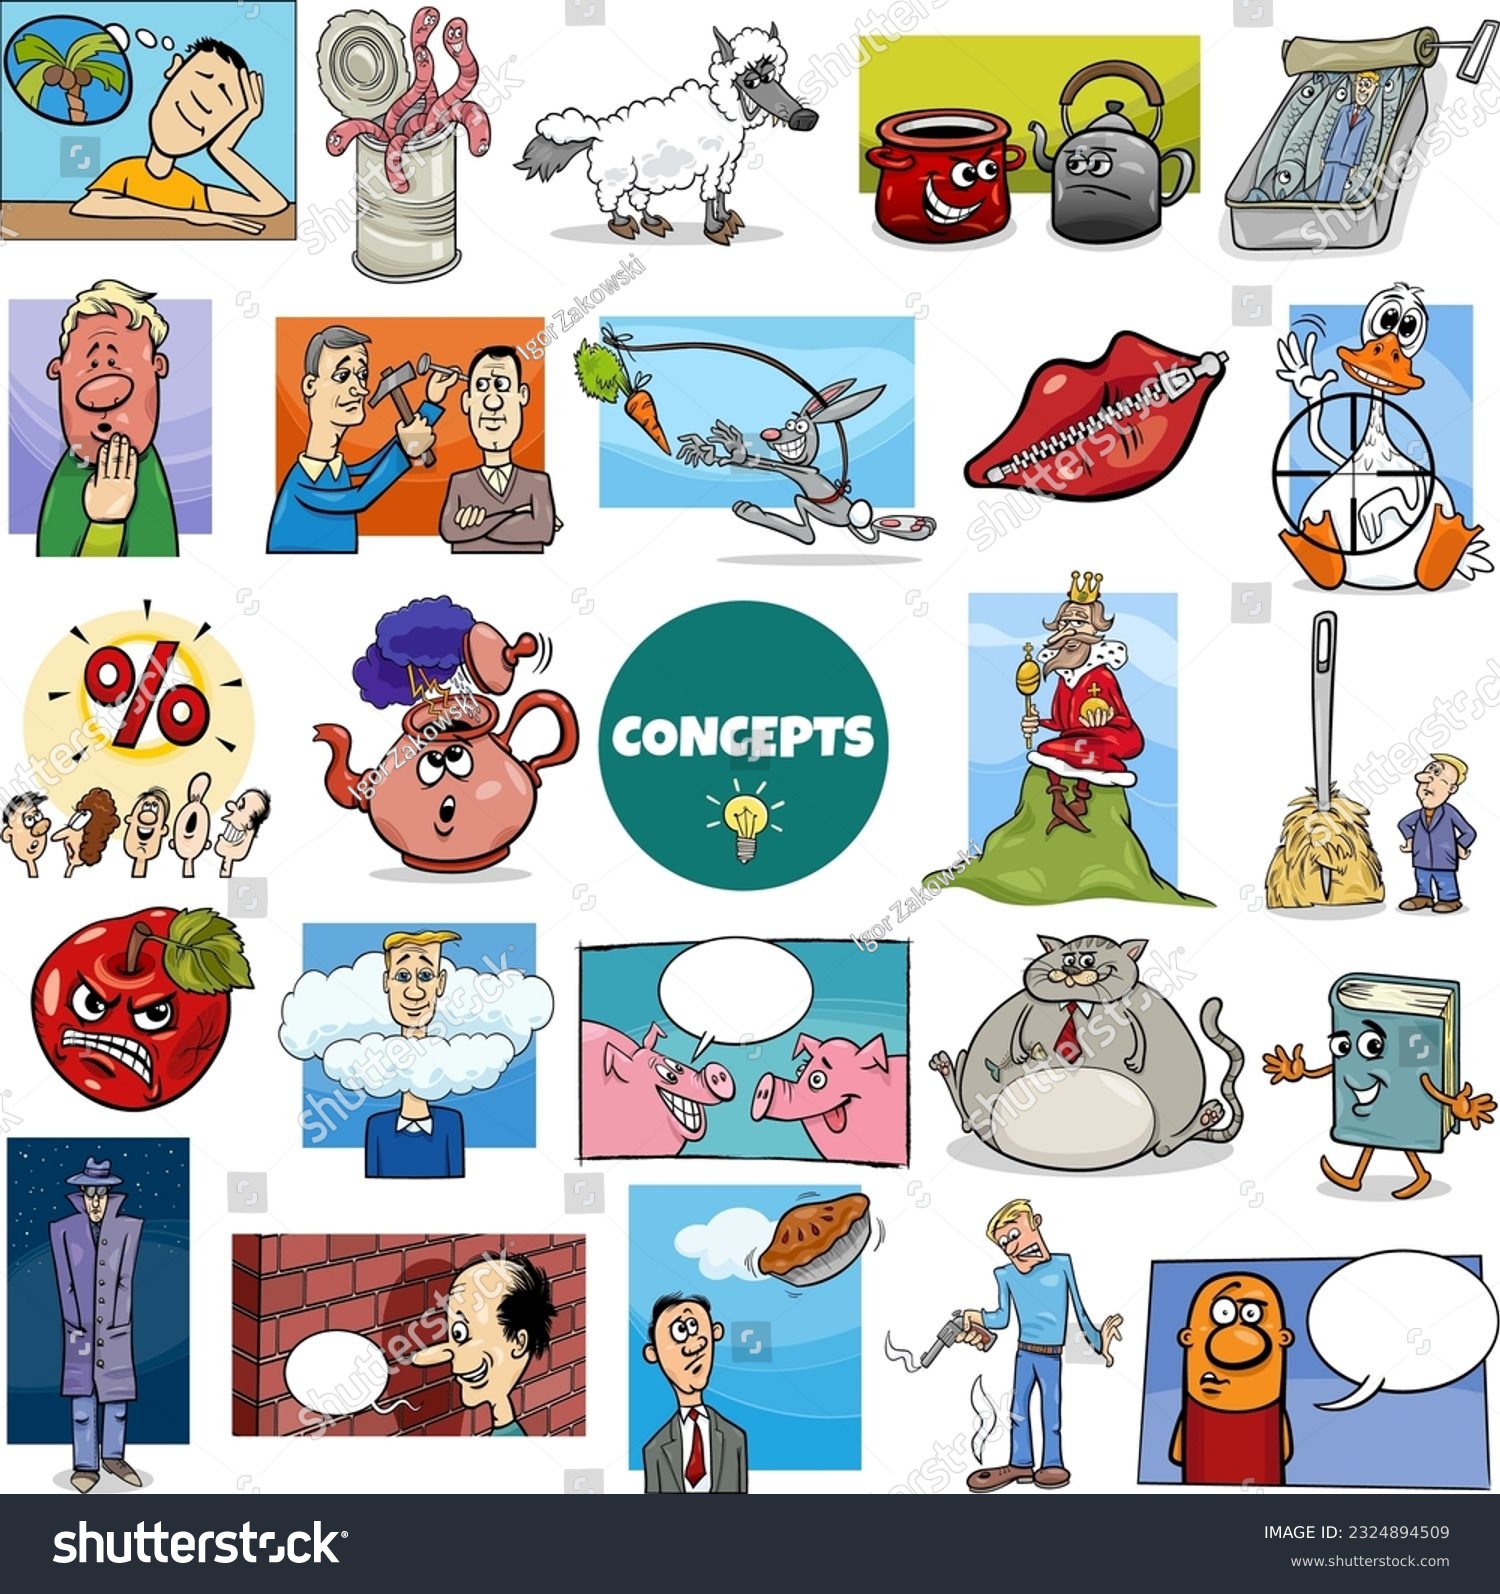 SVG of Illustration big set of humorous cartoon concepts or metaphors and ideas with comic characters svg